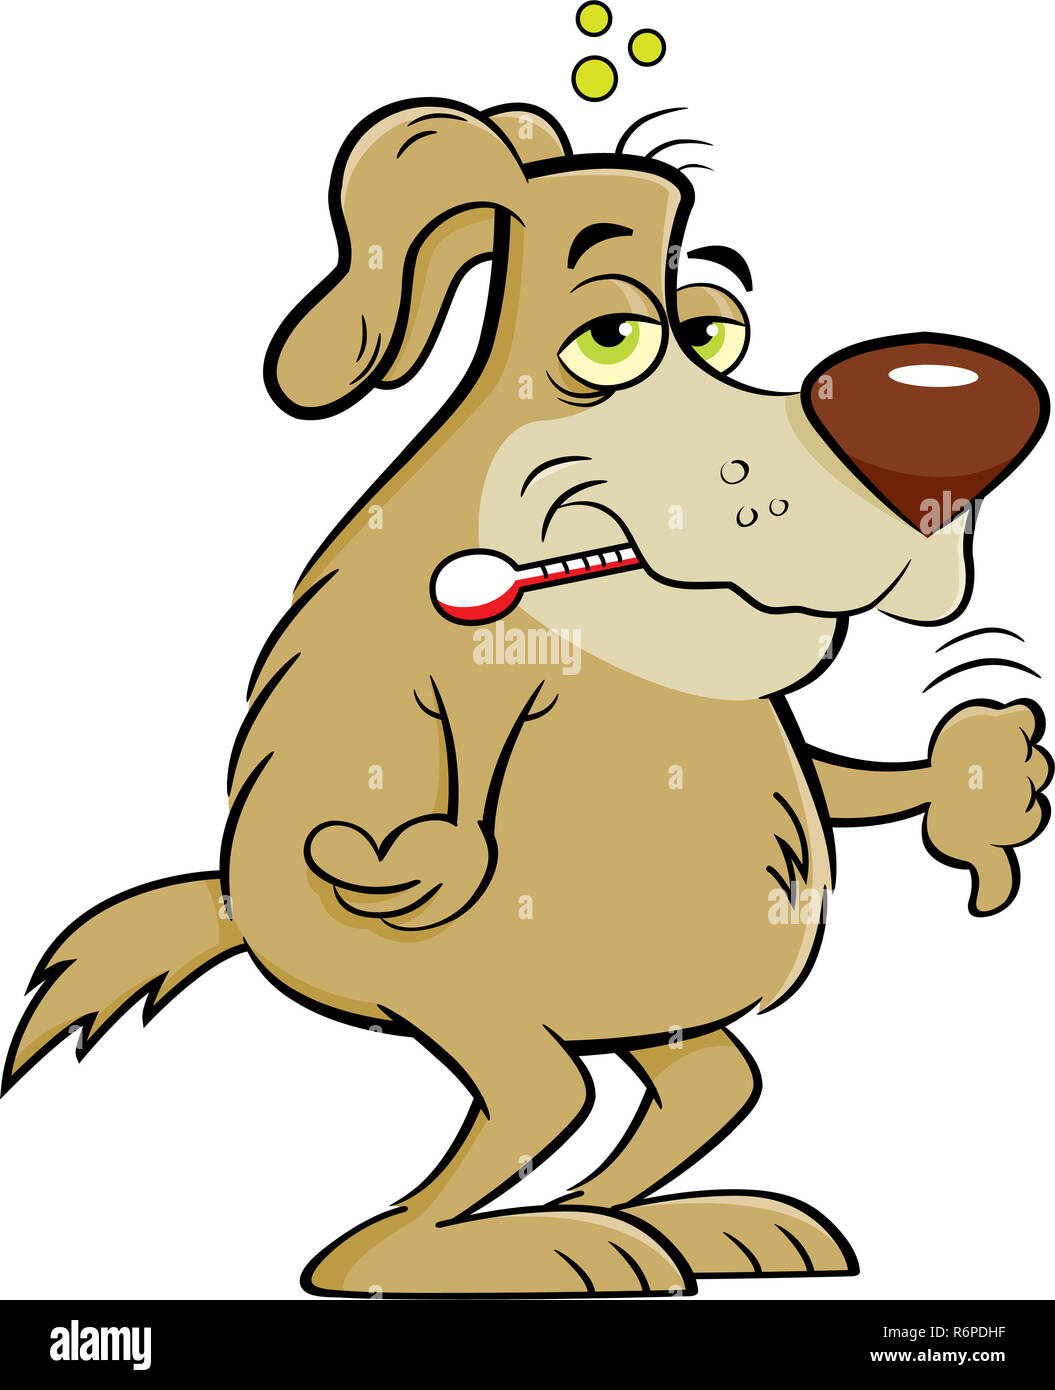 animal, canine, cartoon, clip art, depressed, dog, fitness, funny, health, humorous, mammal, medical, pet, sad, sick, thermometer, thumbs down, unhappy, unhealthy, Stock Photo